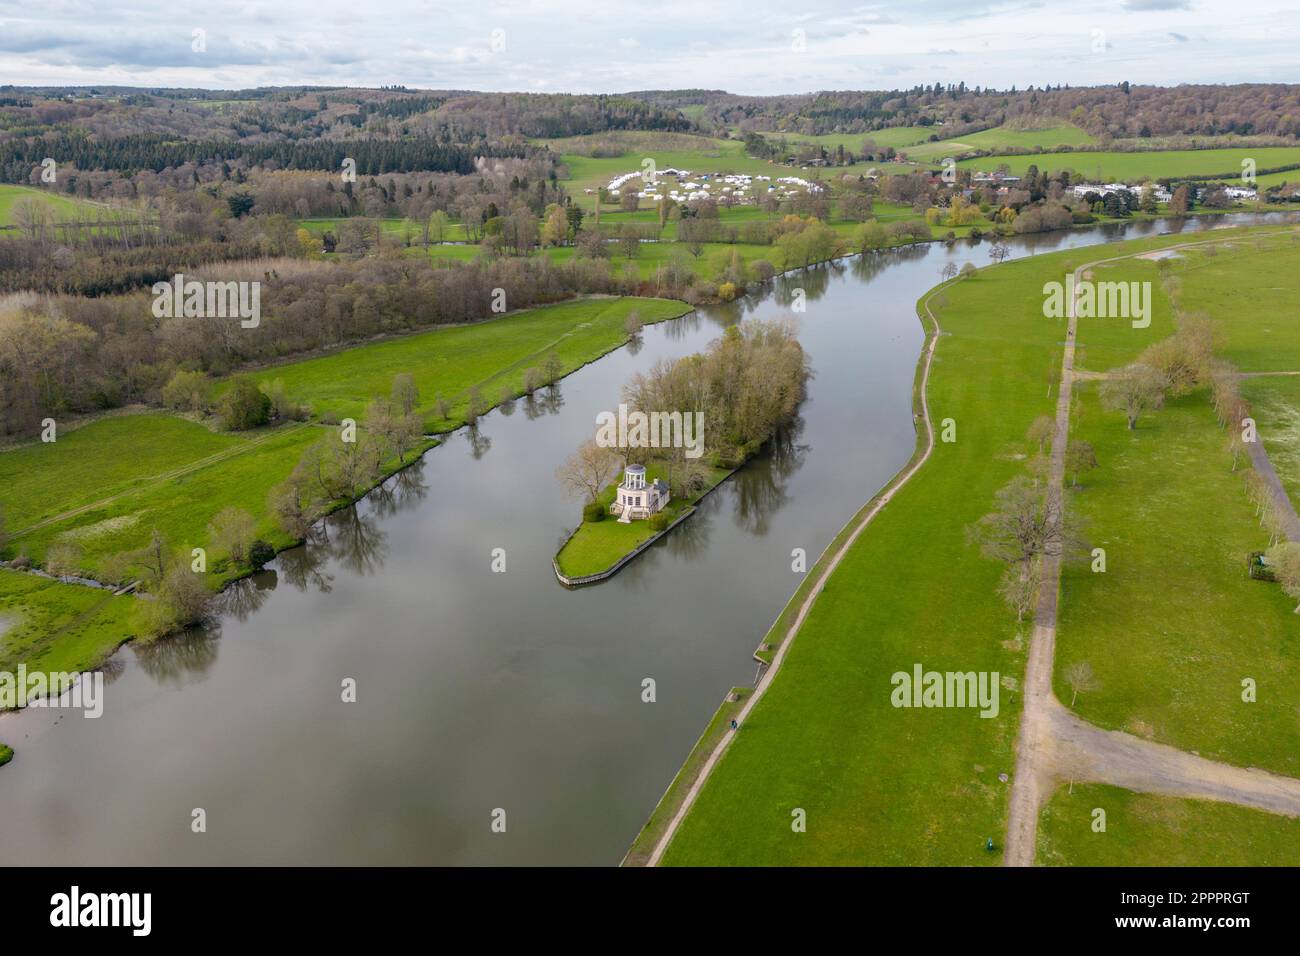 Aerial view of the ornamental temple (a folly) on Temple Island, an eyot in the River Thames just north of Henley-on-Thames, Oxfordshire, UK. Stock Photo